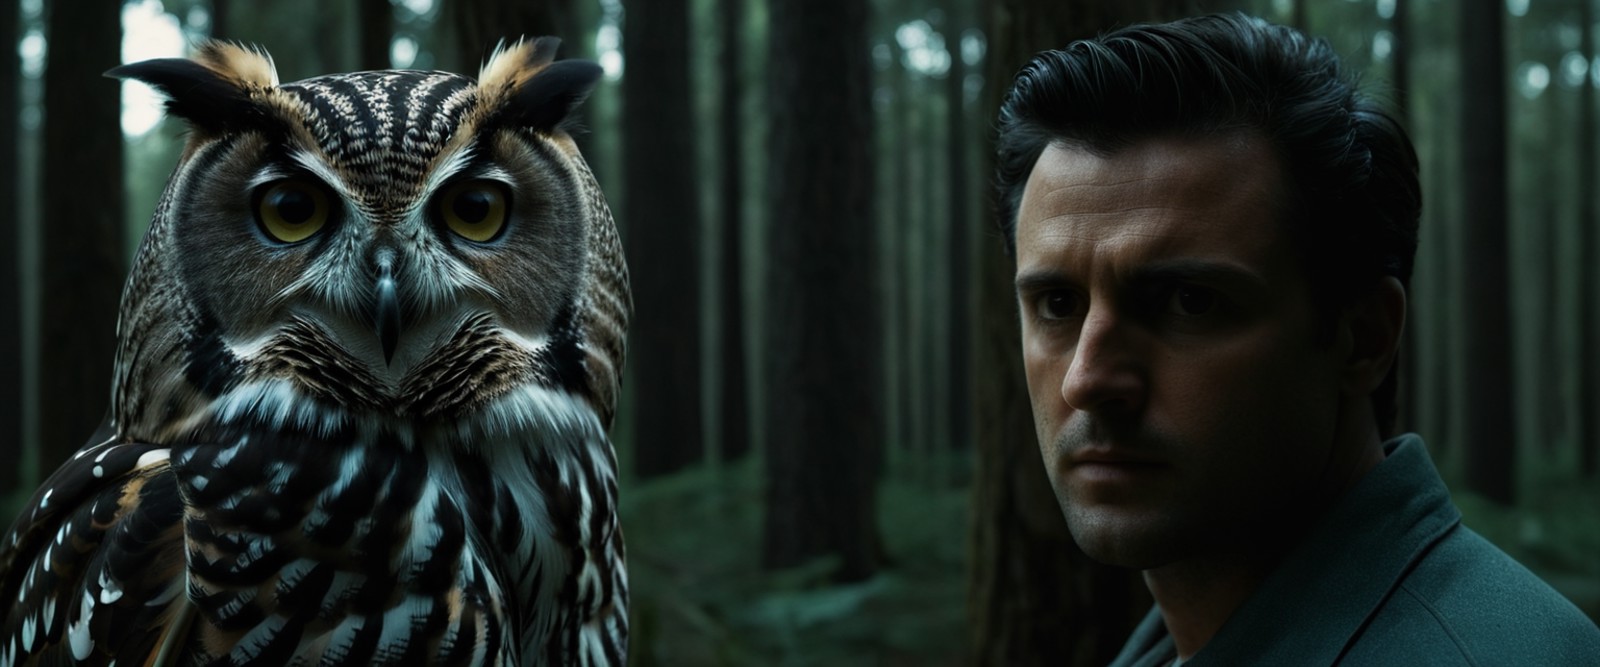 cinematic film still of  <lora:Split Diopter style:1>
Split image focus of a closeup of a large owl staring at camera next...